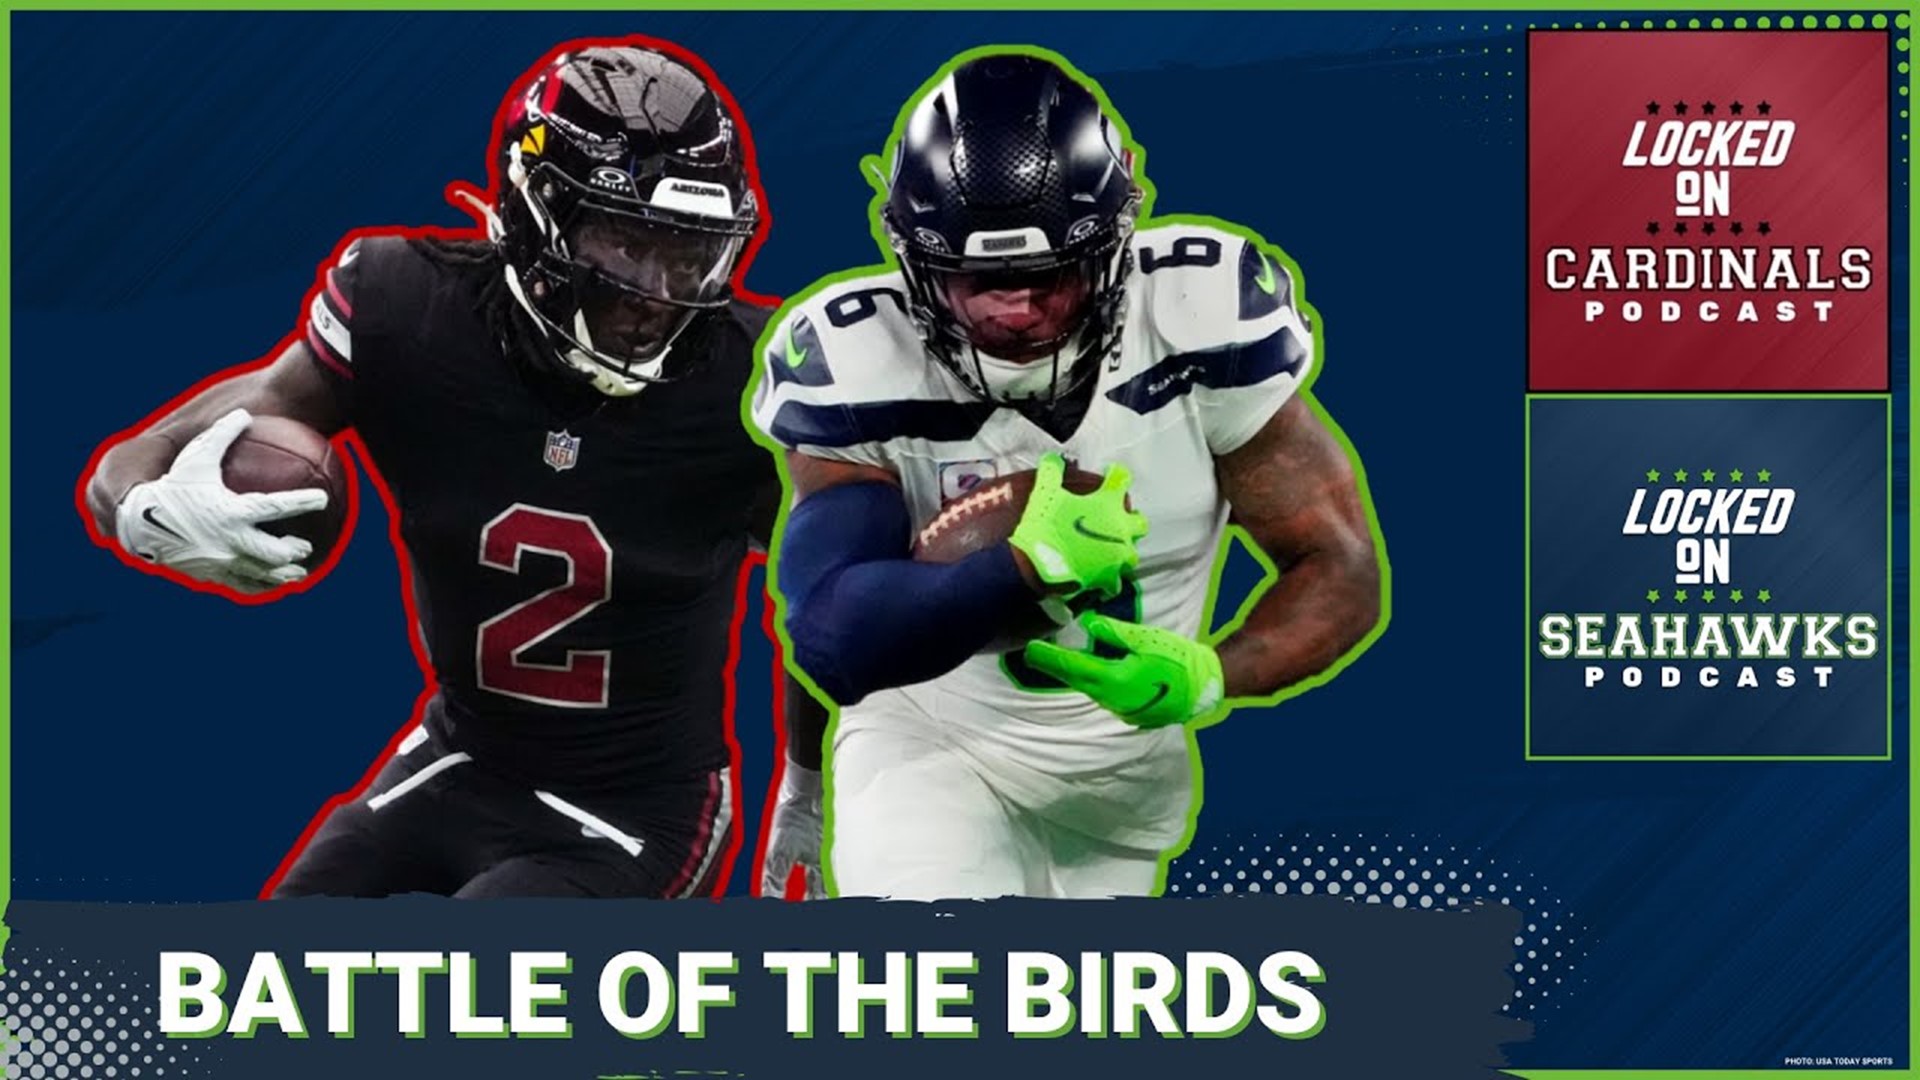 While the Seahawks have fared far better in the win column than the Cardinals, the two rivals prepare to face each other for the first time in 2023